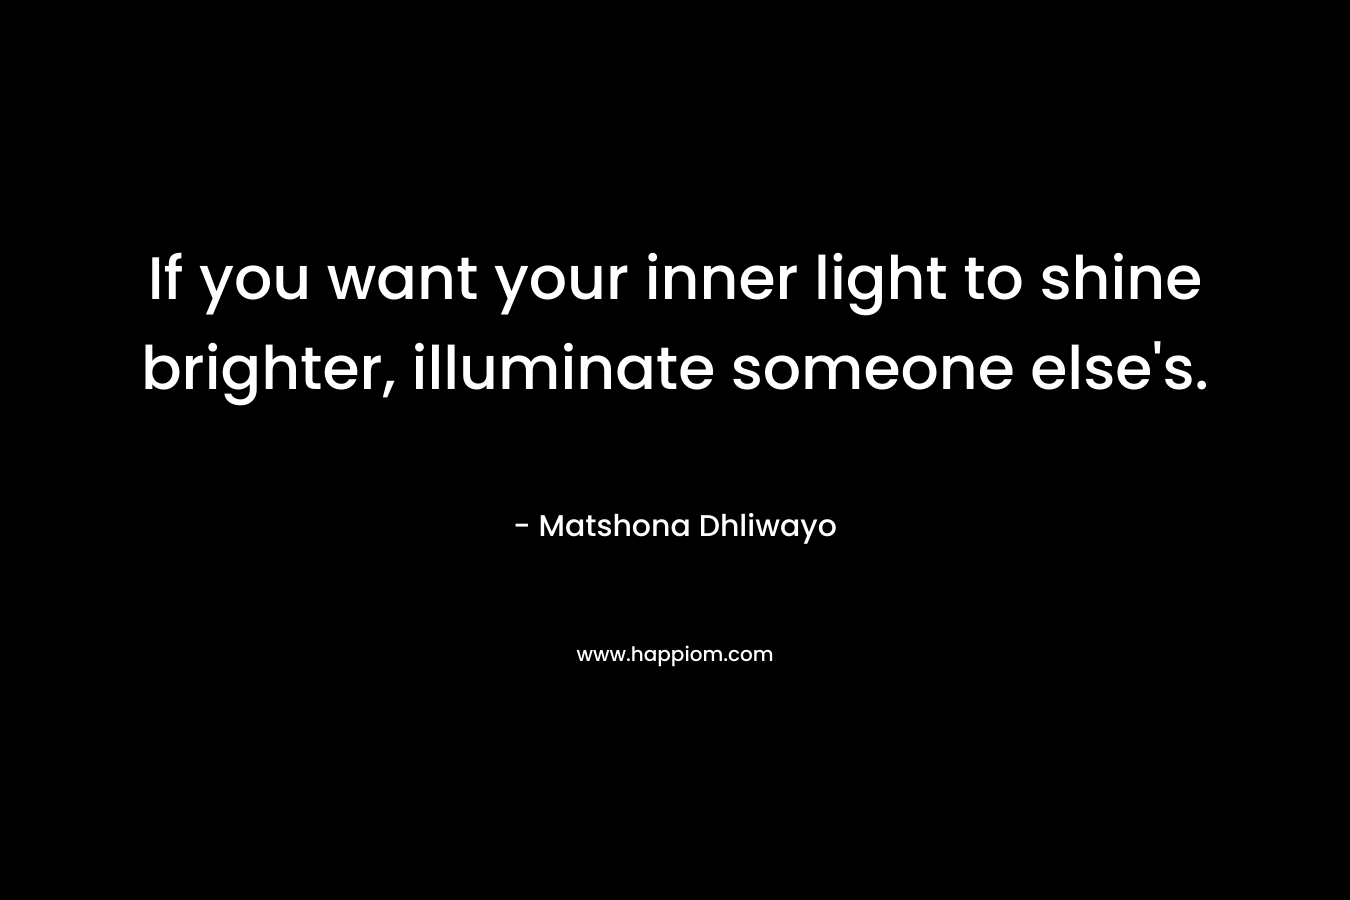 If you want your inner light to shine brighter, illuminate someone else's.